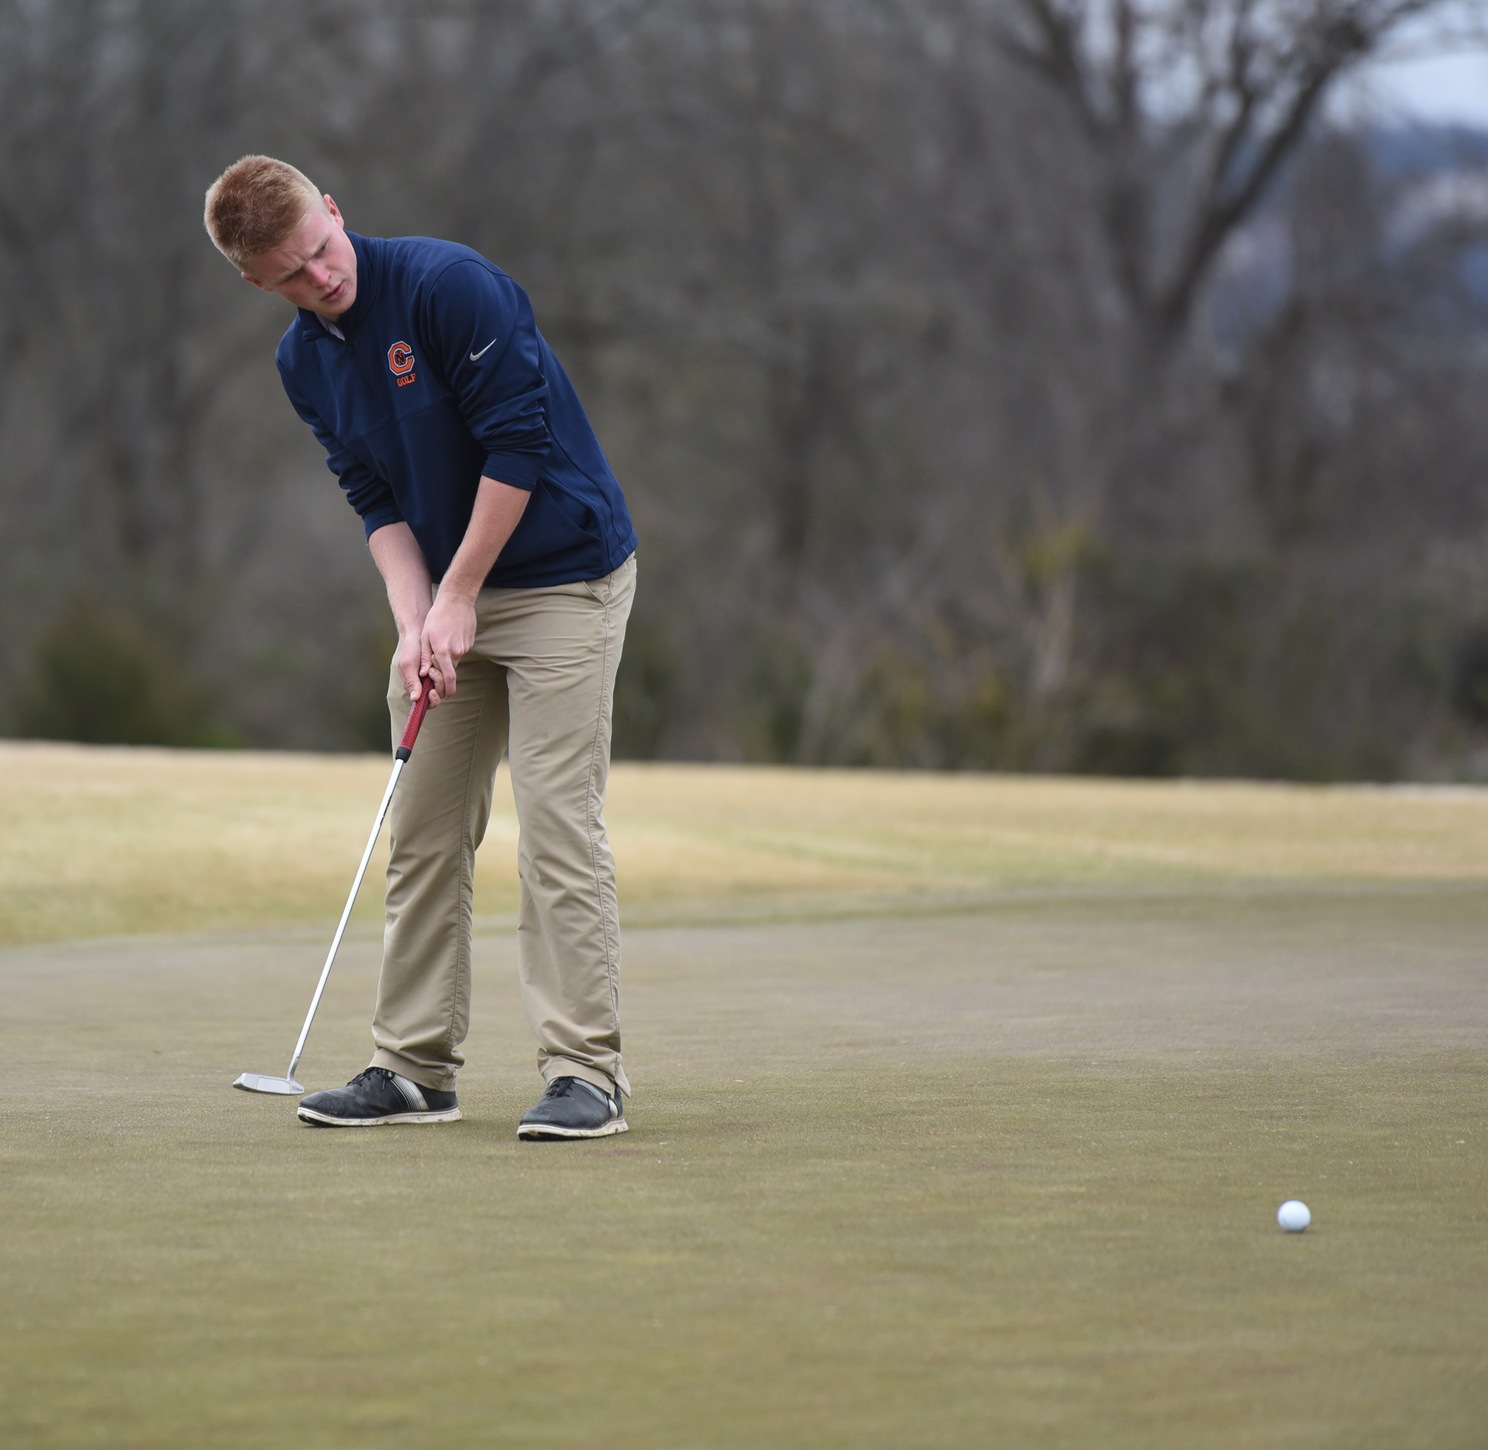 Forster, Headrick guide Eagles into first place after round one